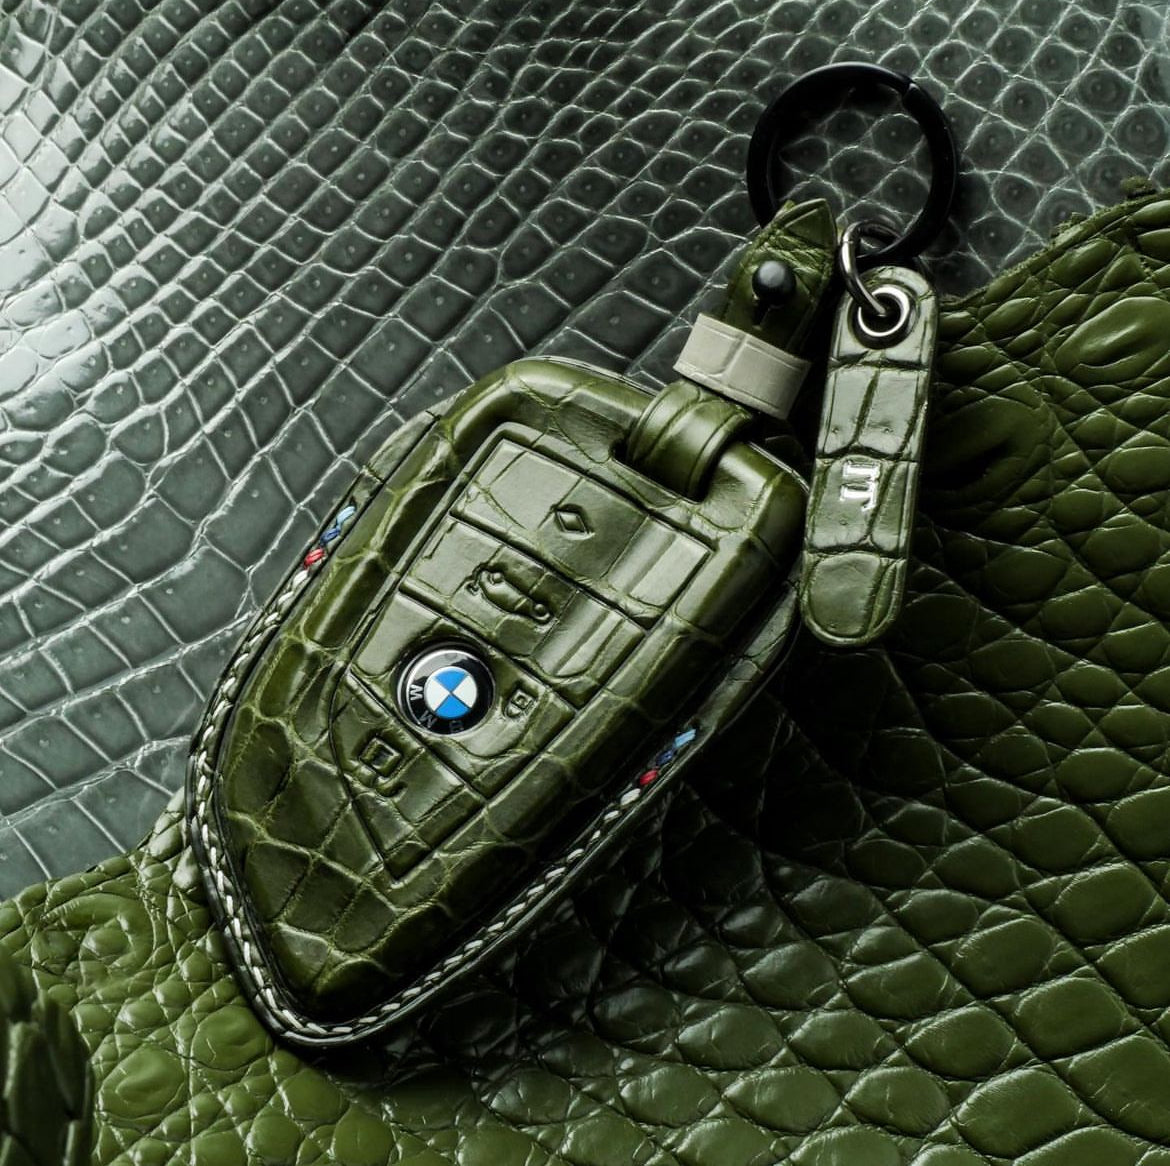 BMW Key Fob Cover Type 1 - CUSTOMIZE YOURS